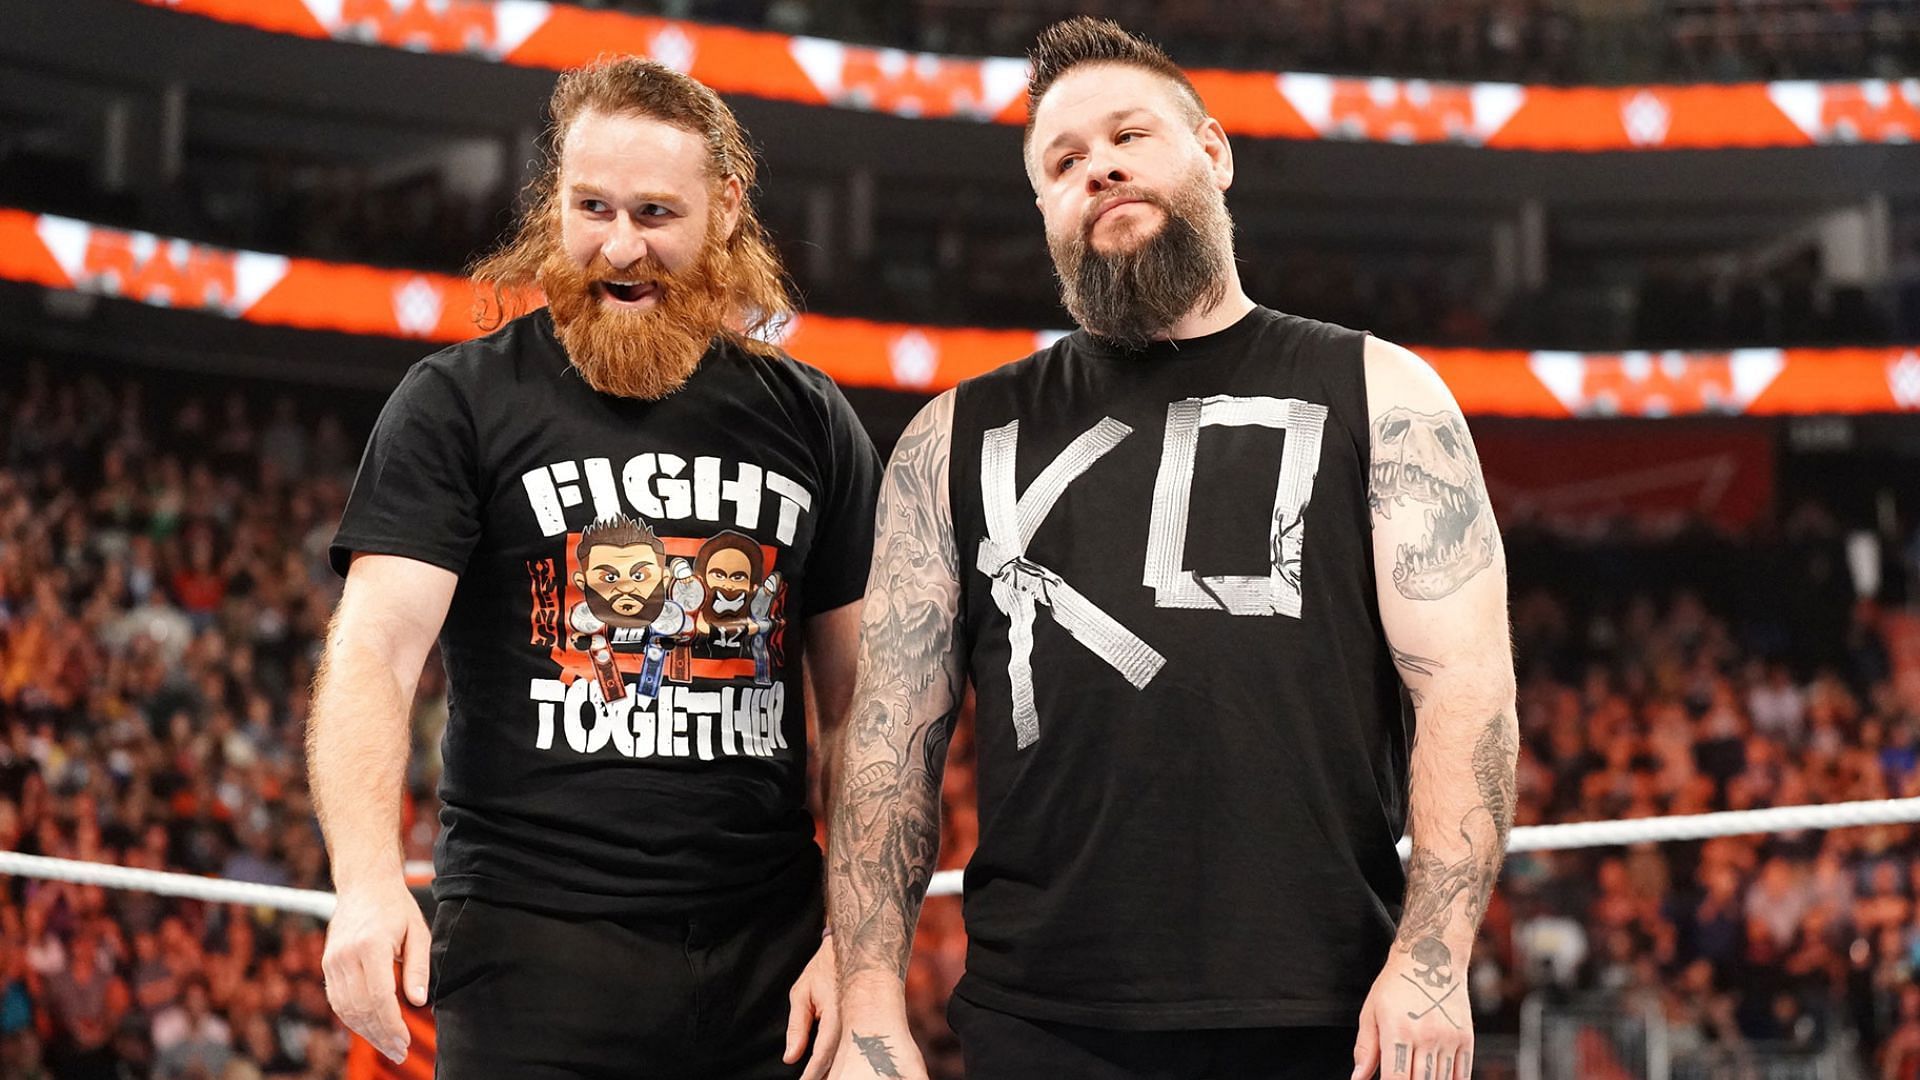 Sami Zayn and Kevin Owens had ended the historic Tag Team title reign of the Usos